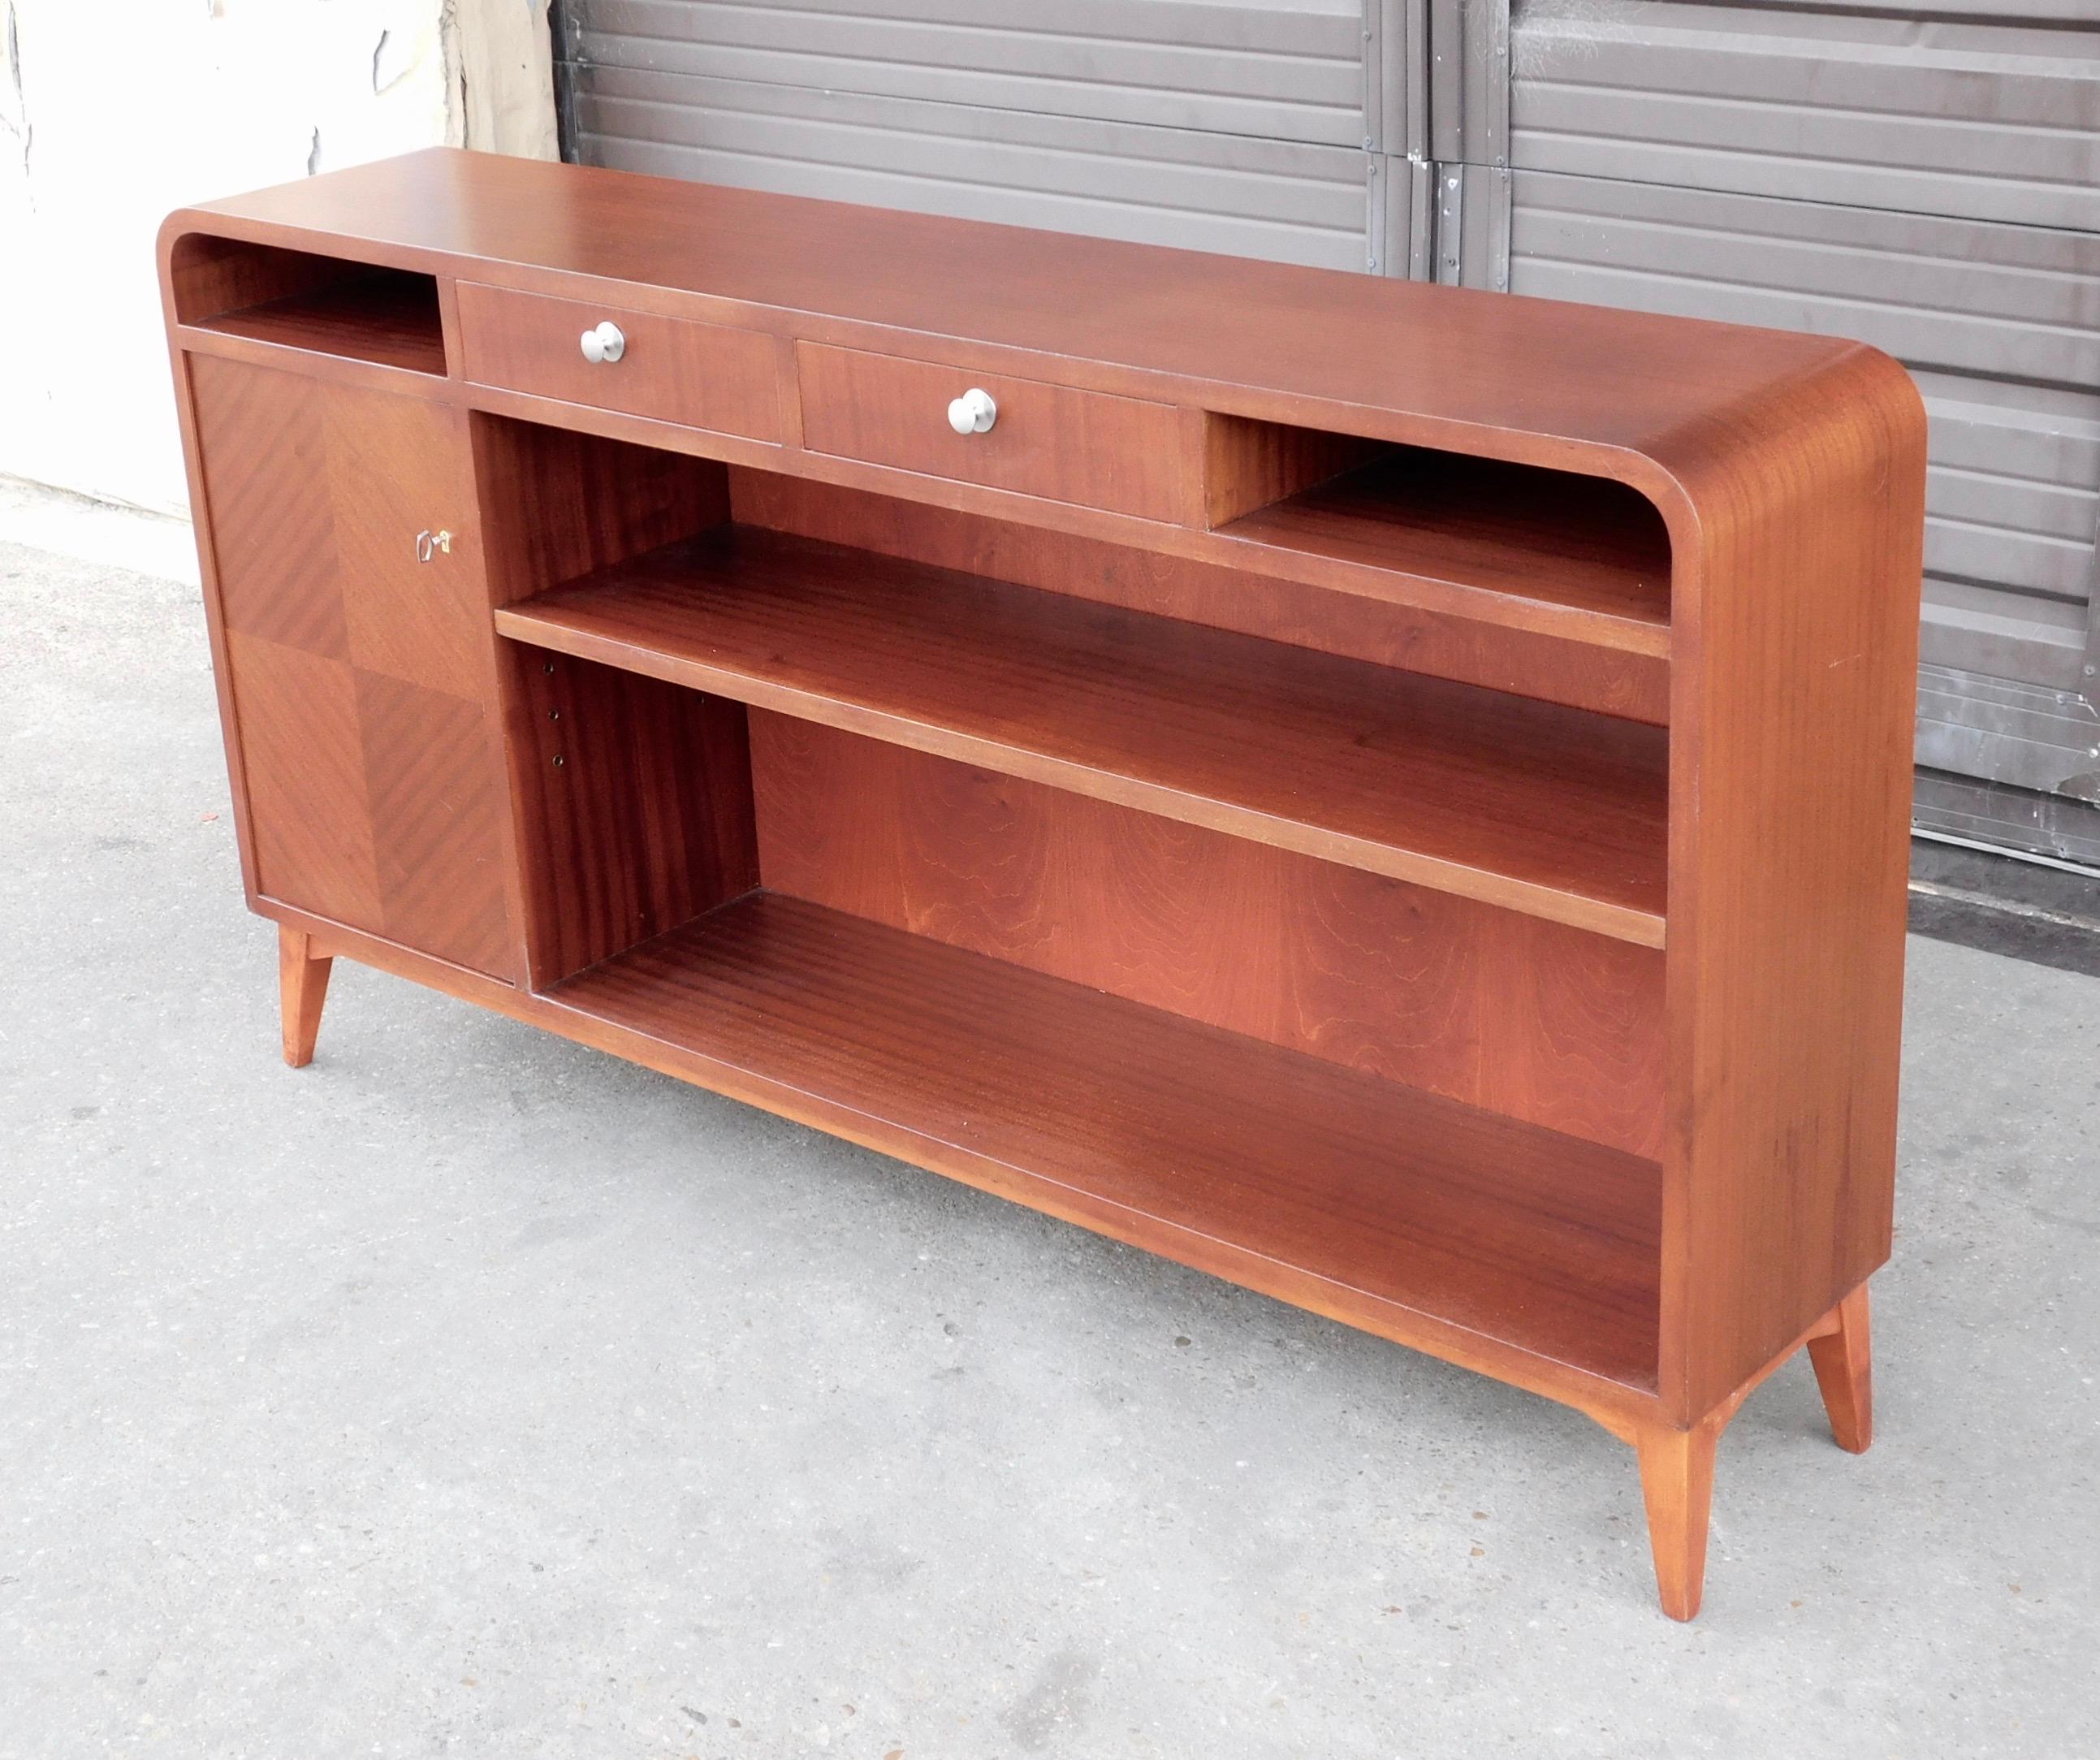 Swedish art moderne bookcase rendered in book matched mahogany.
With one shelf and one interior cabinet.
With original key and original adjustable/removable shelf.
This piece has just had light restoration by our woodworkers and is in great